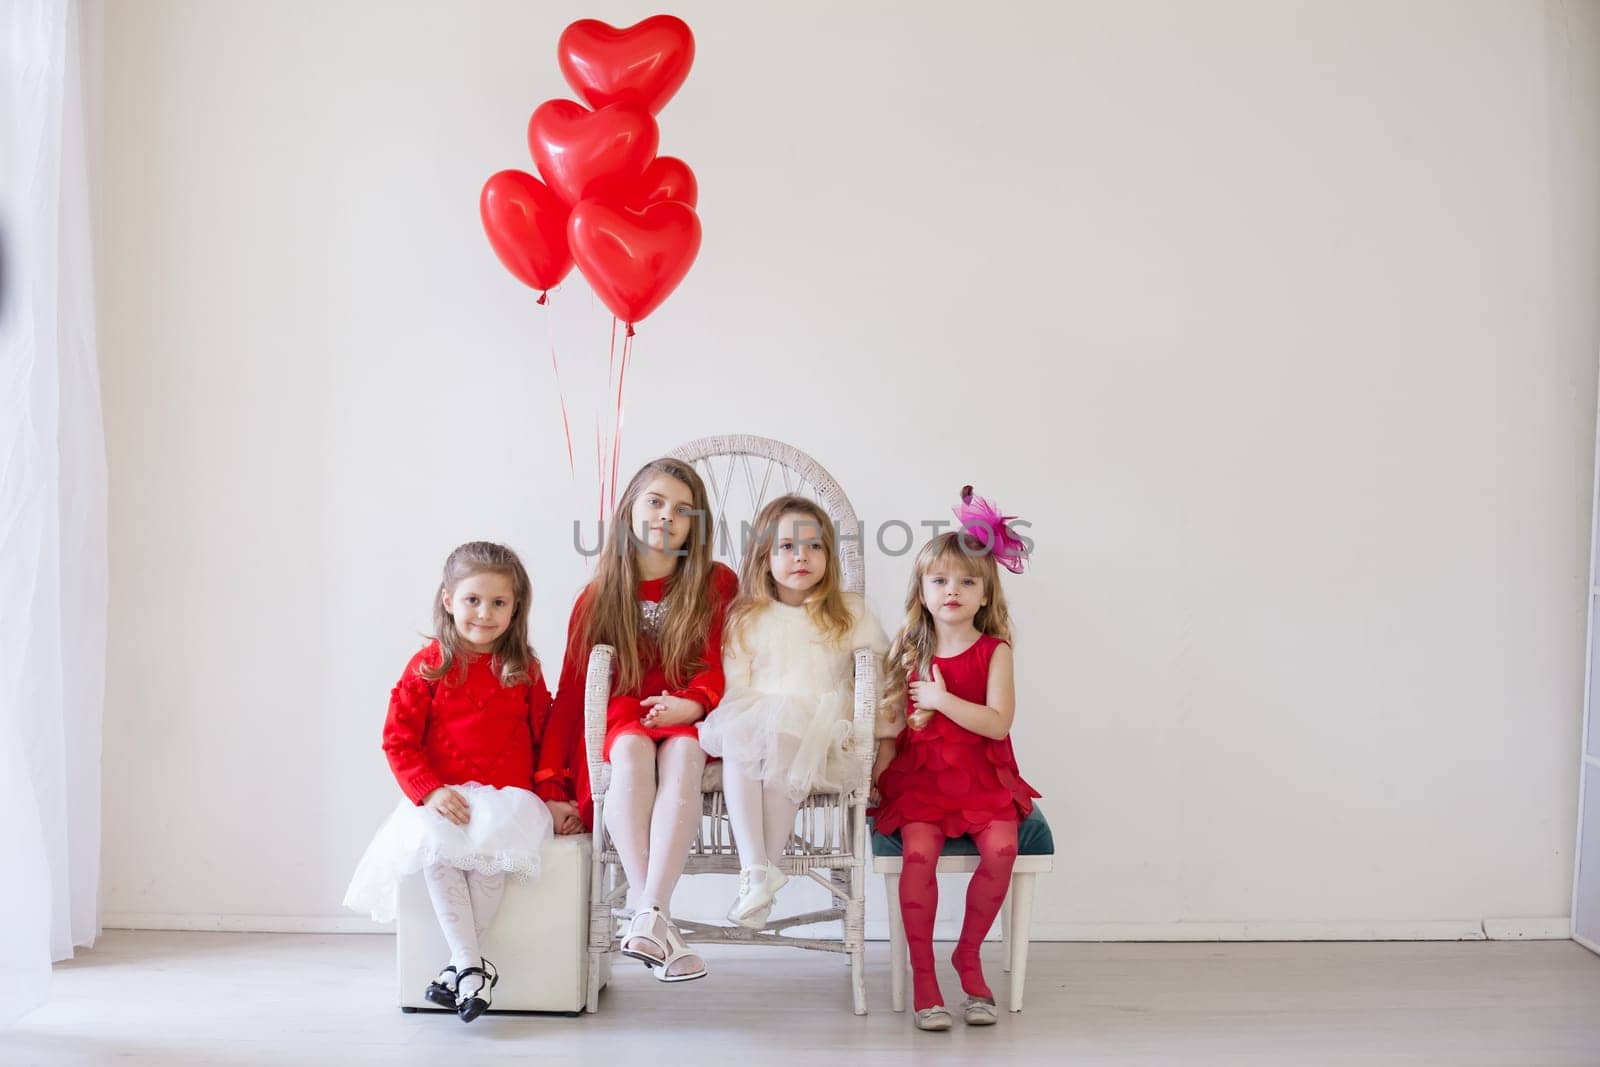 Kids with red balloons for birthday in the interior by Simakov